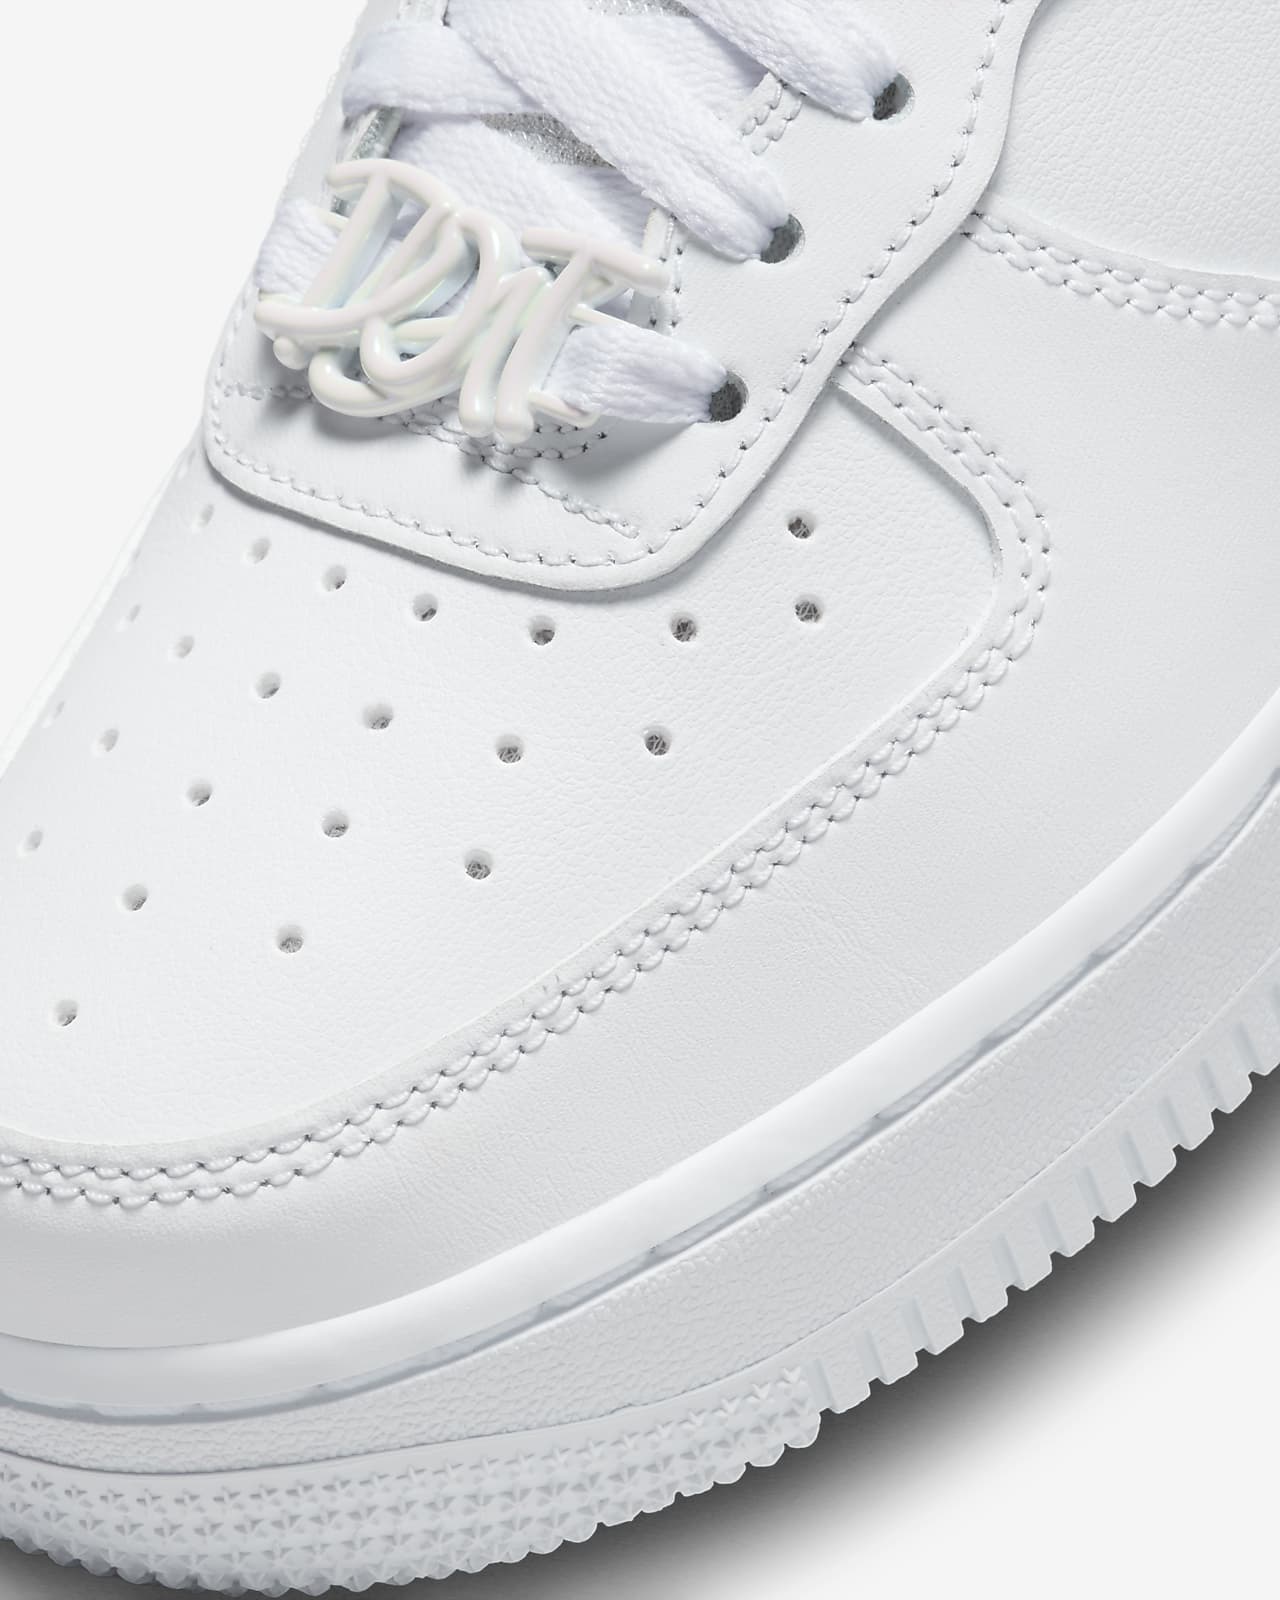 Nike Air Force 1 '07 LV8 Women's Shoes. Nike IN